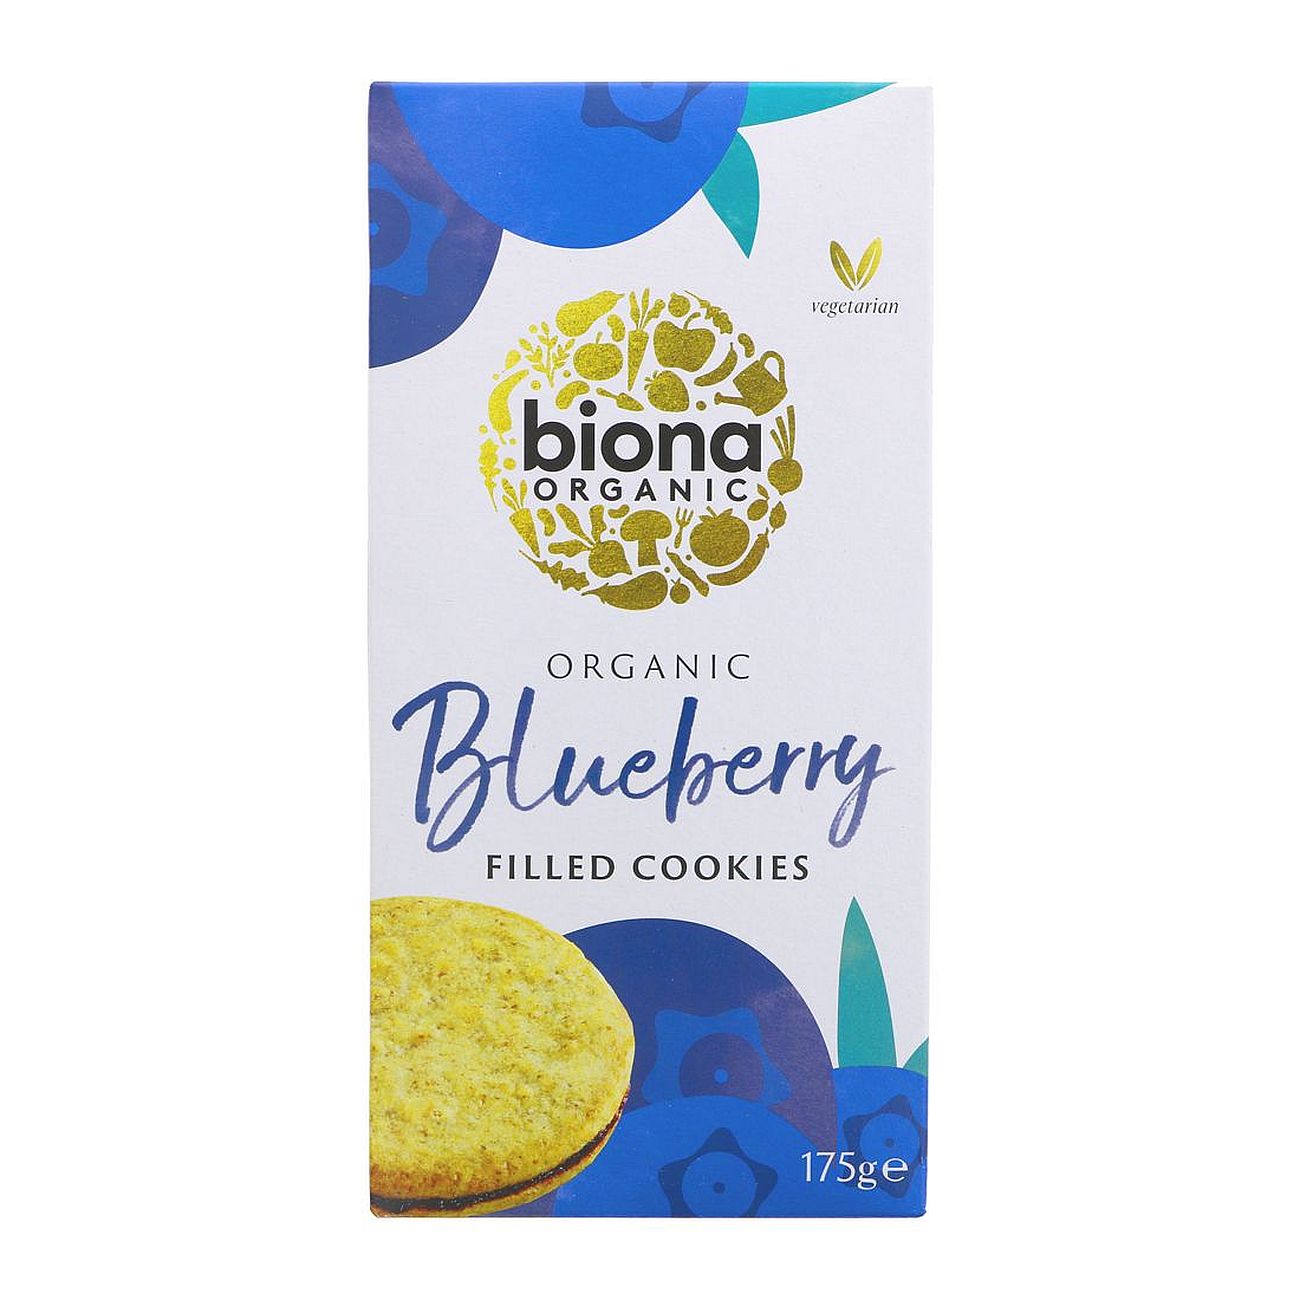 Organic Blueberry Filled Cookies 175g